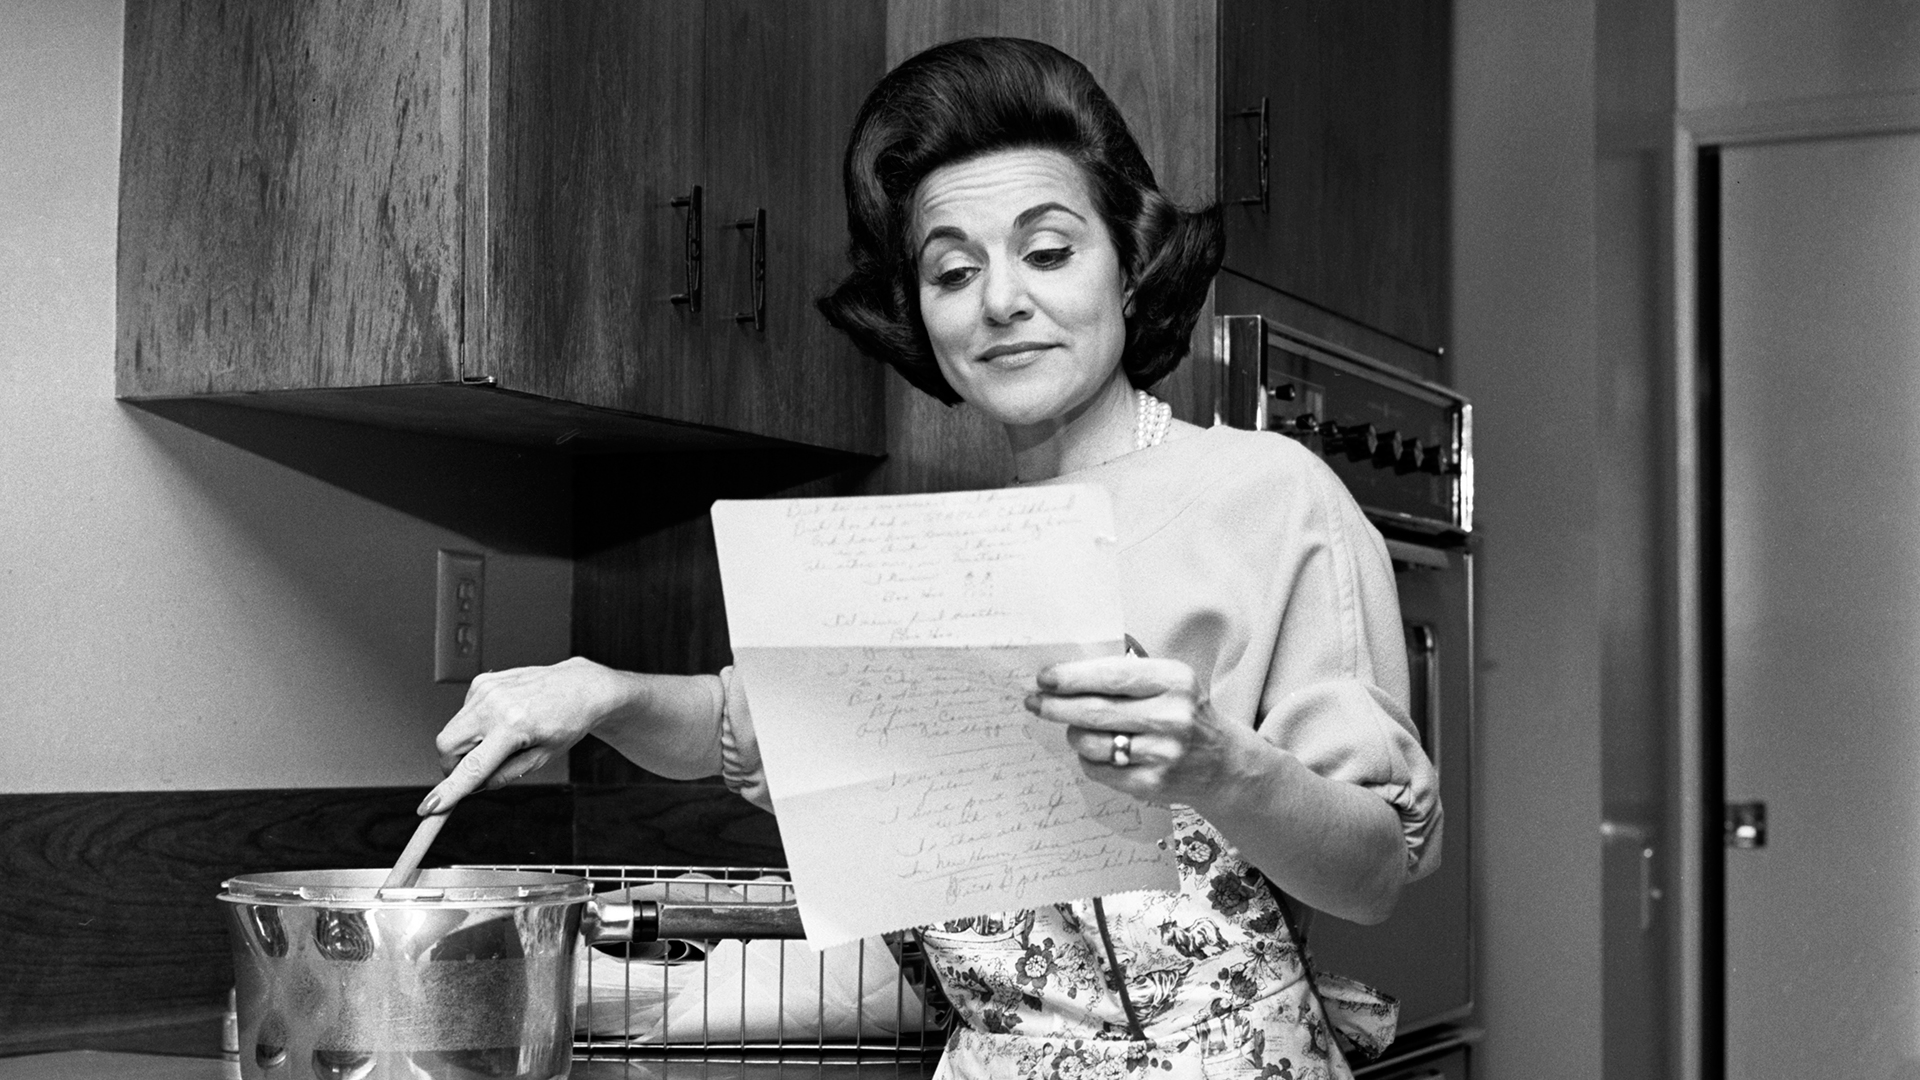 January 9, 1956: Abigail Van Buren's "Dear Abby" Column First Appeared and Was Read by Over 95 Million People Daily